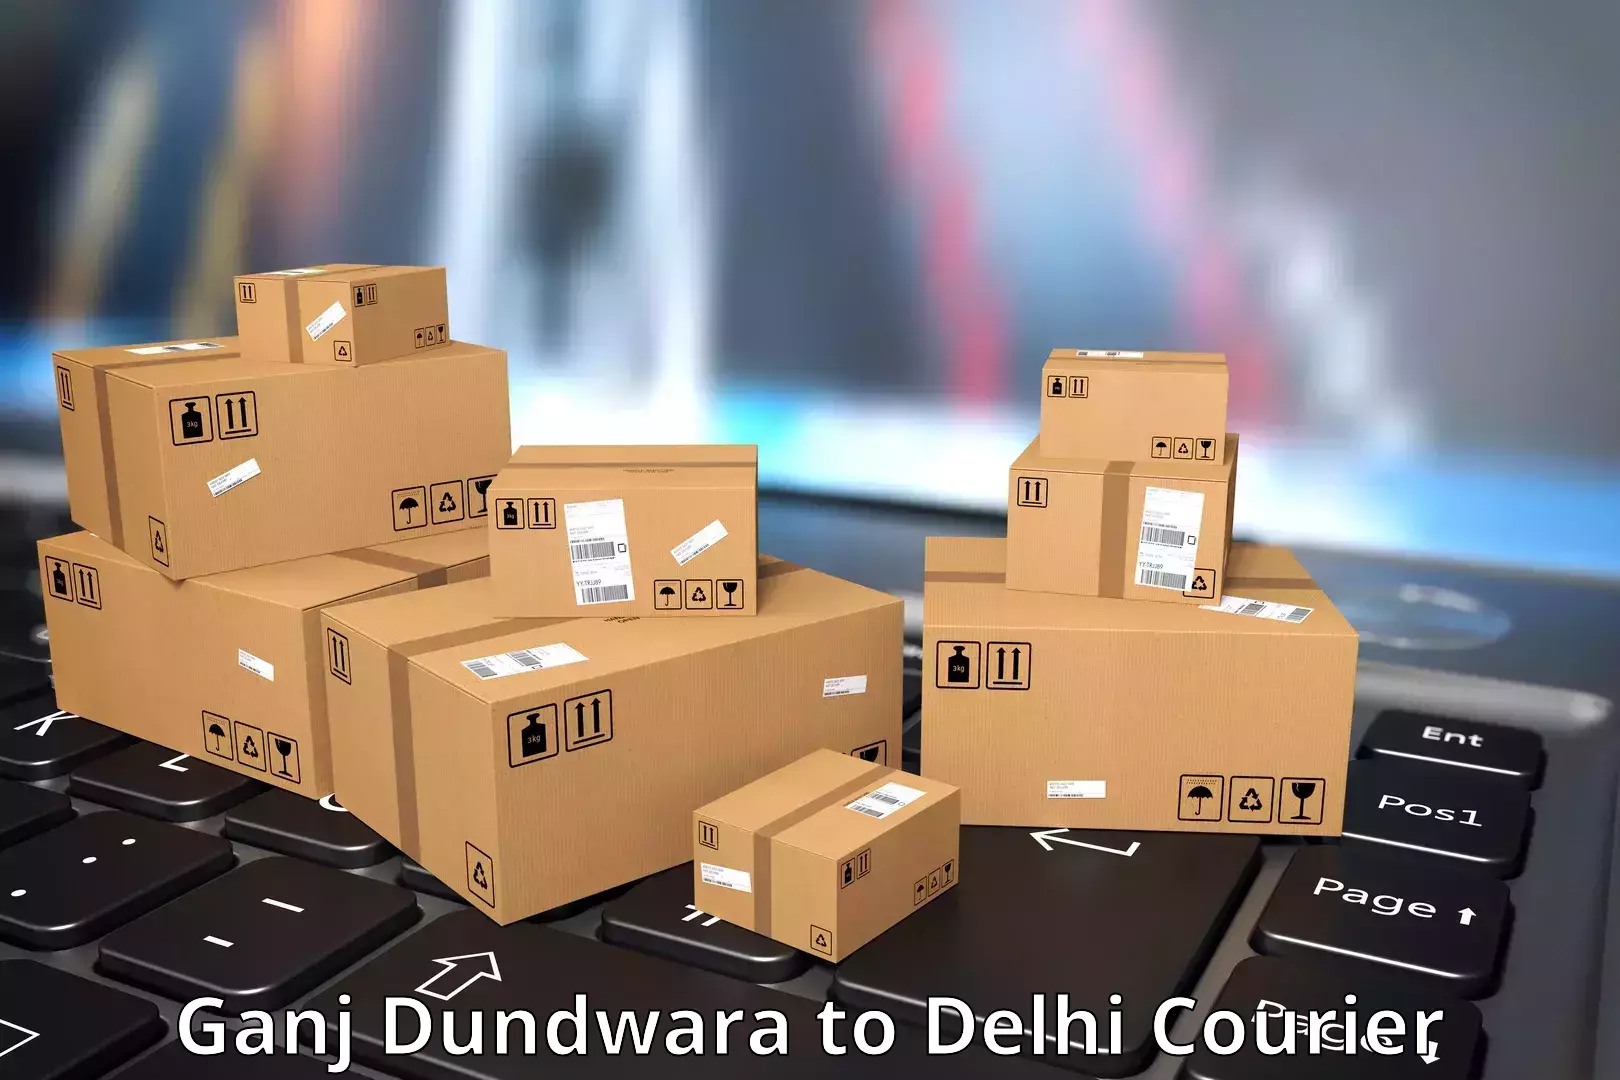 State-of-the-art courier technology Ganj Dundwara to NCR